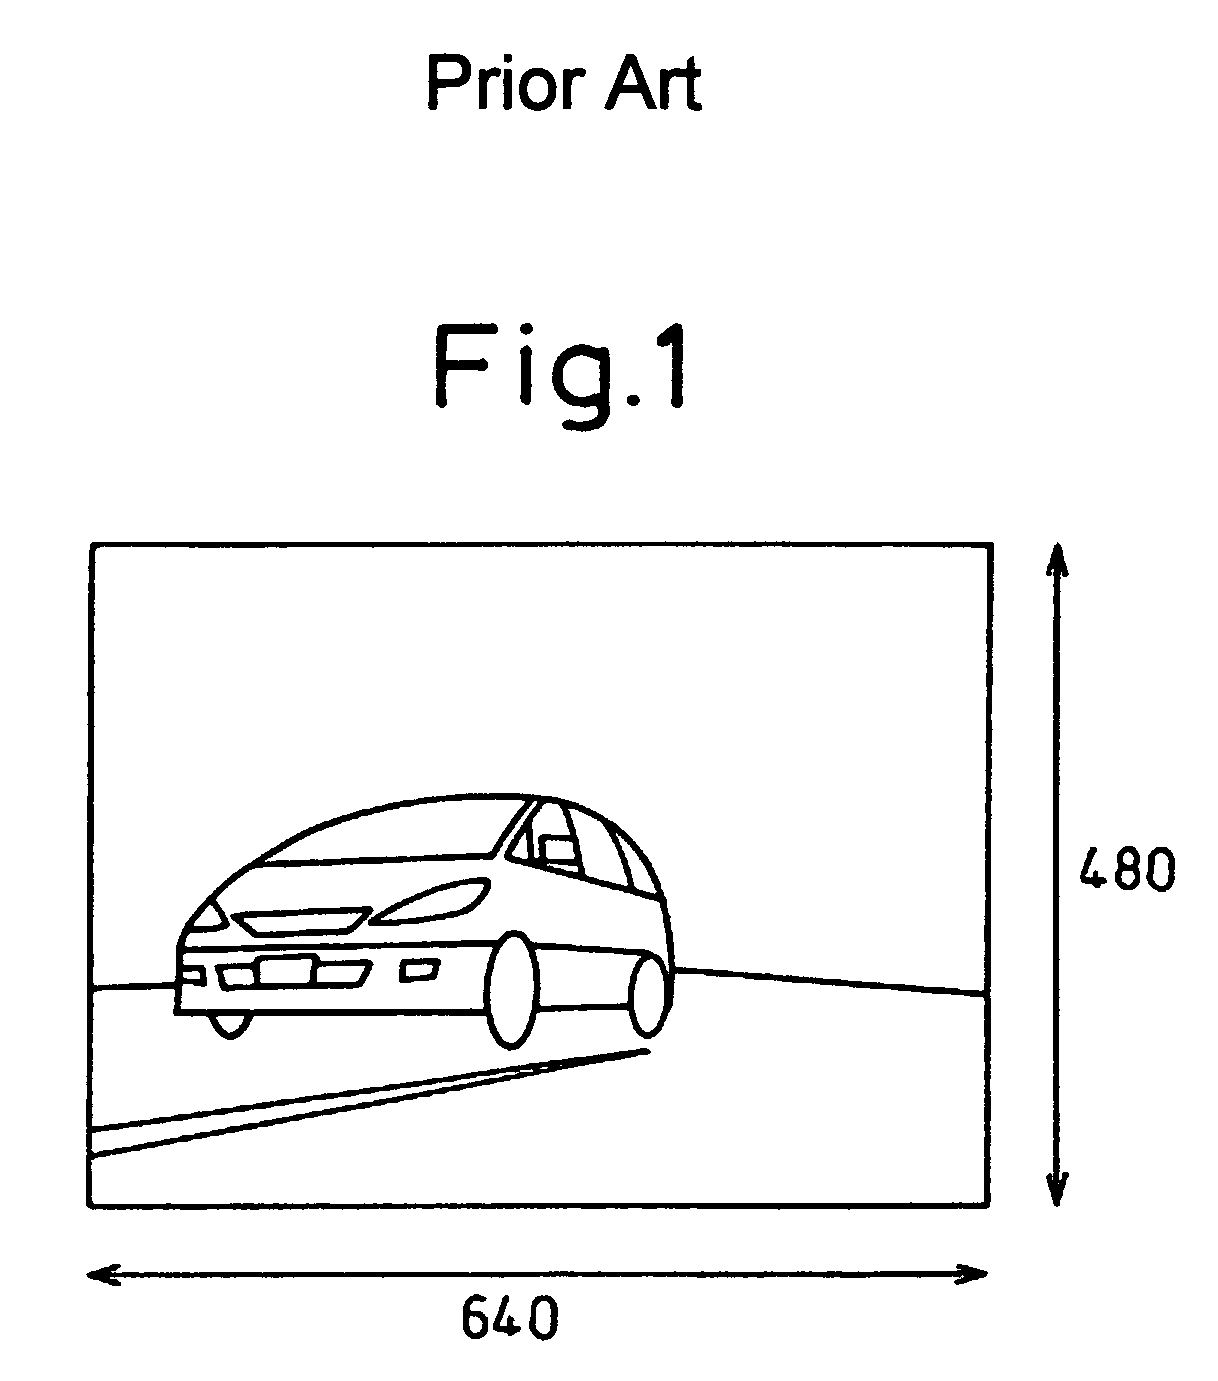 Image processing apparatus for selectively storing specific regions of an image